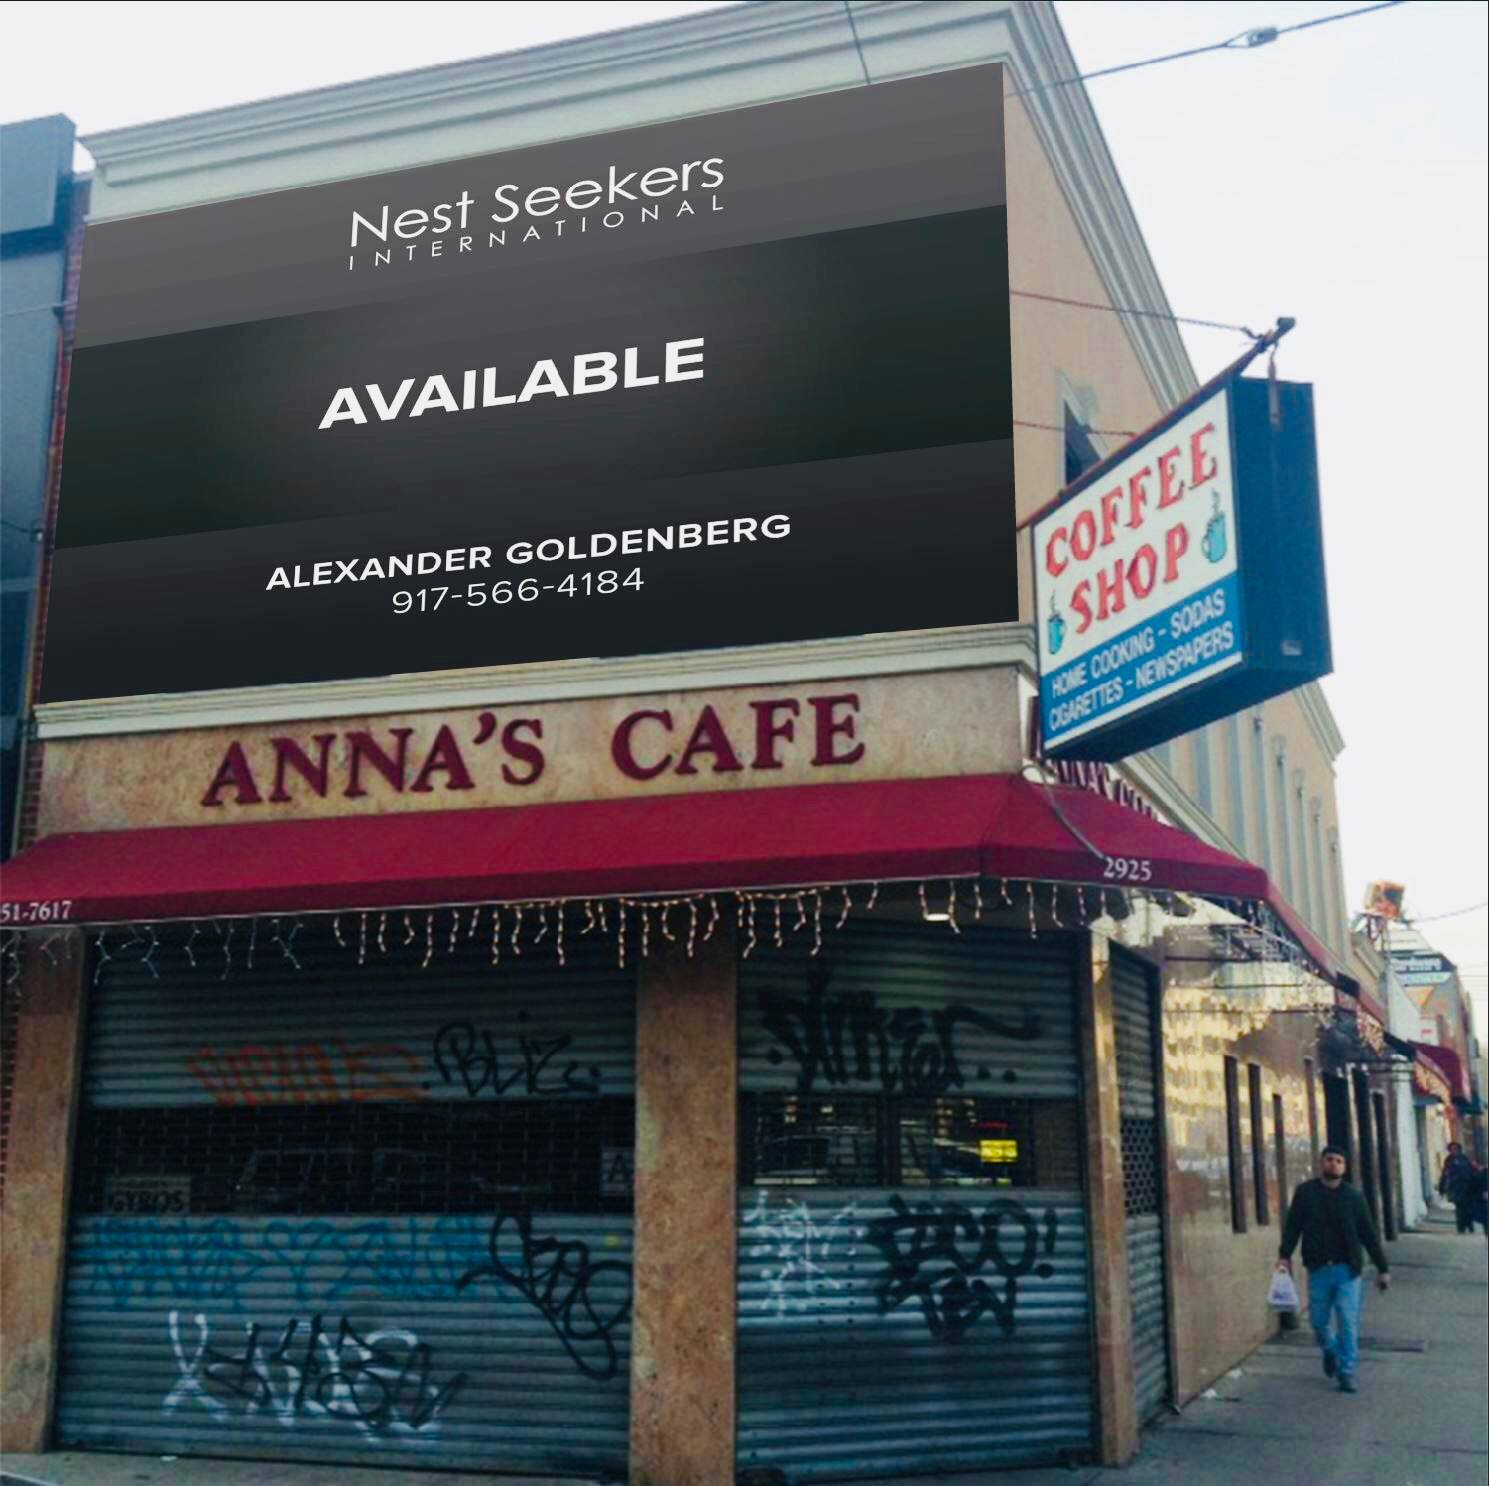 2925 Avenue I Brooklyn, NY 11210. A Mix-Use Development Opportunity, with air rights, and existing two businesses. Corner lot R6 Zoning 2.43 FAR, also a combo deal is possible with an additional 4, adjacent lot’s with approx 60,000 ft. of buildable space.